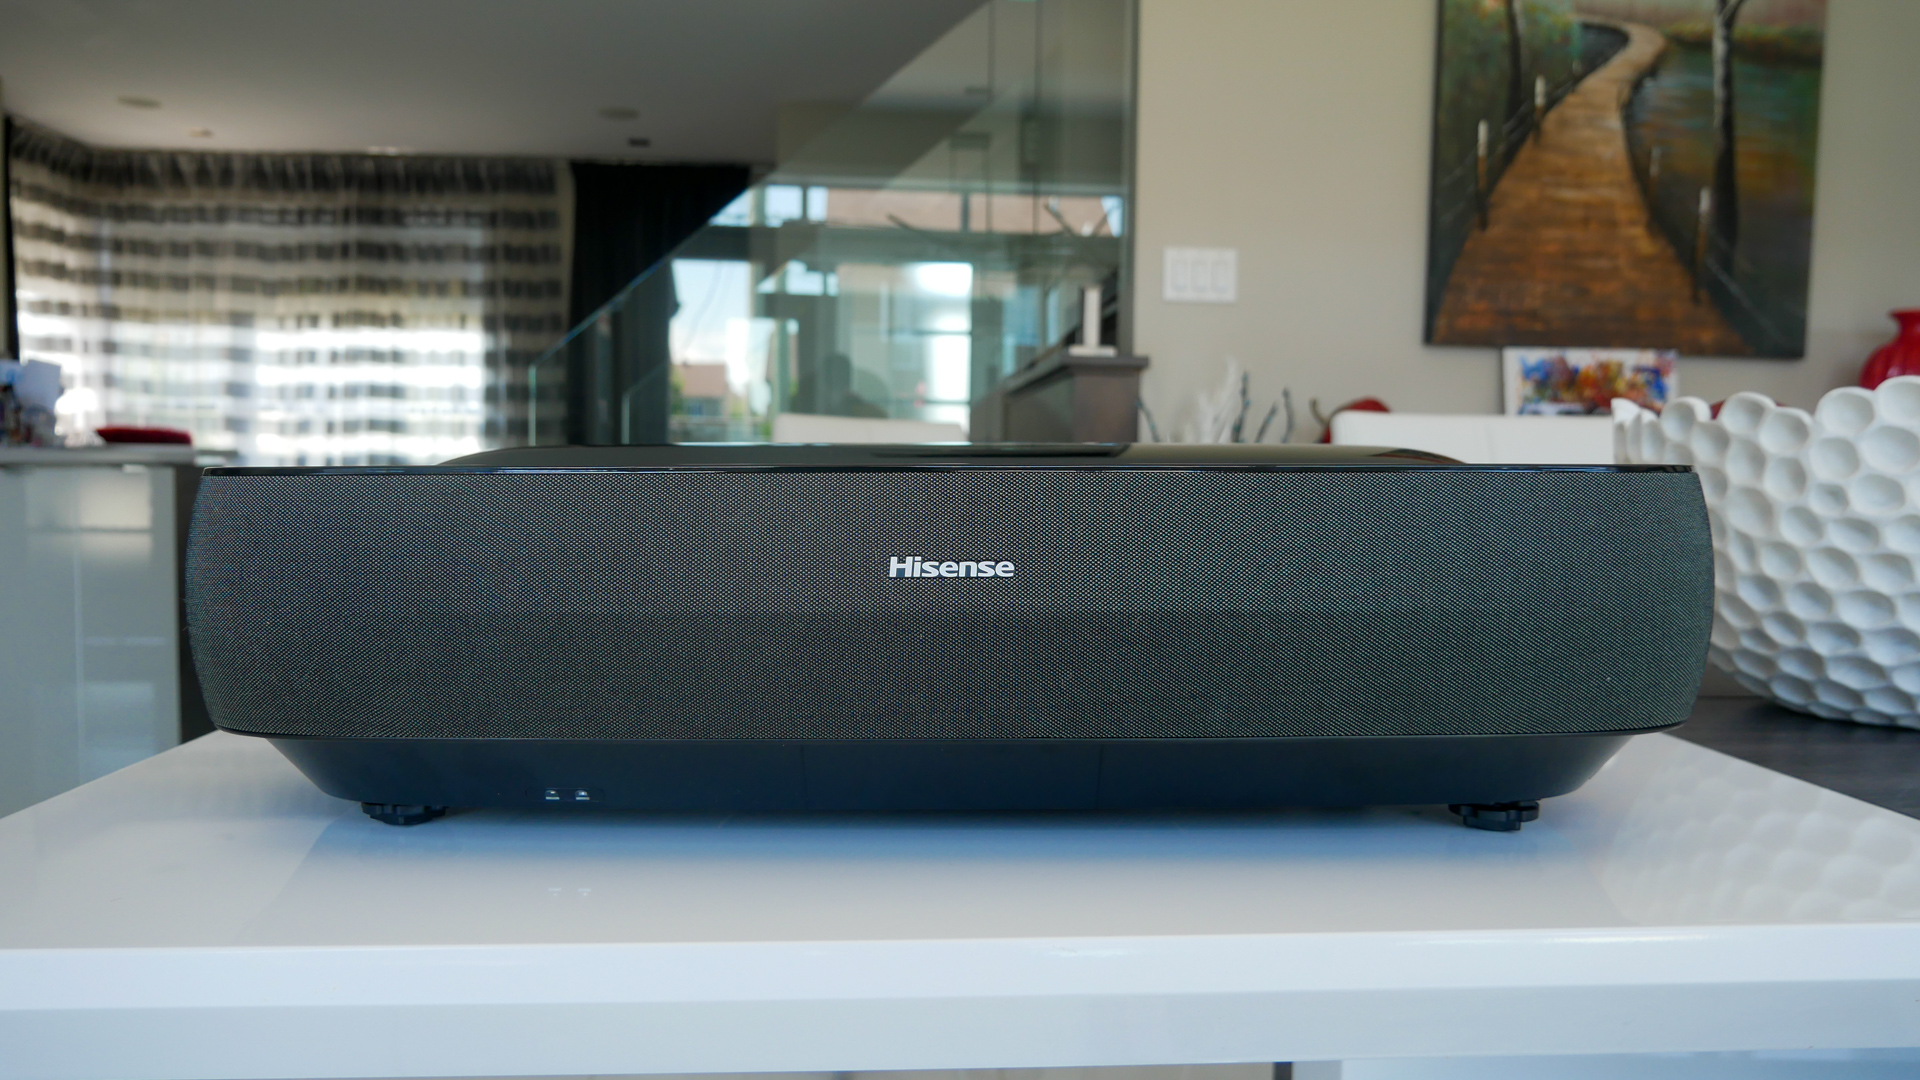 Image of Hisense 100L9G projector on table